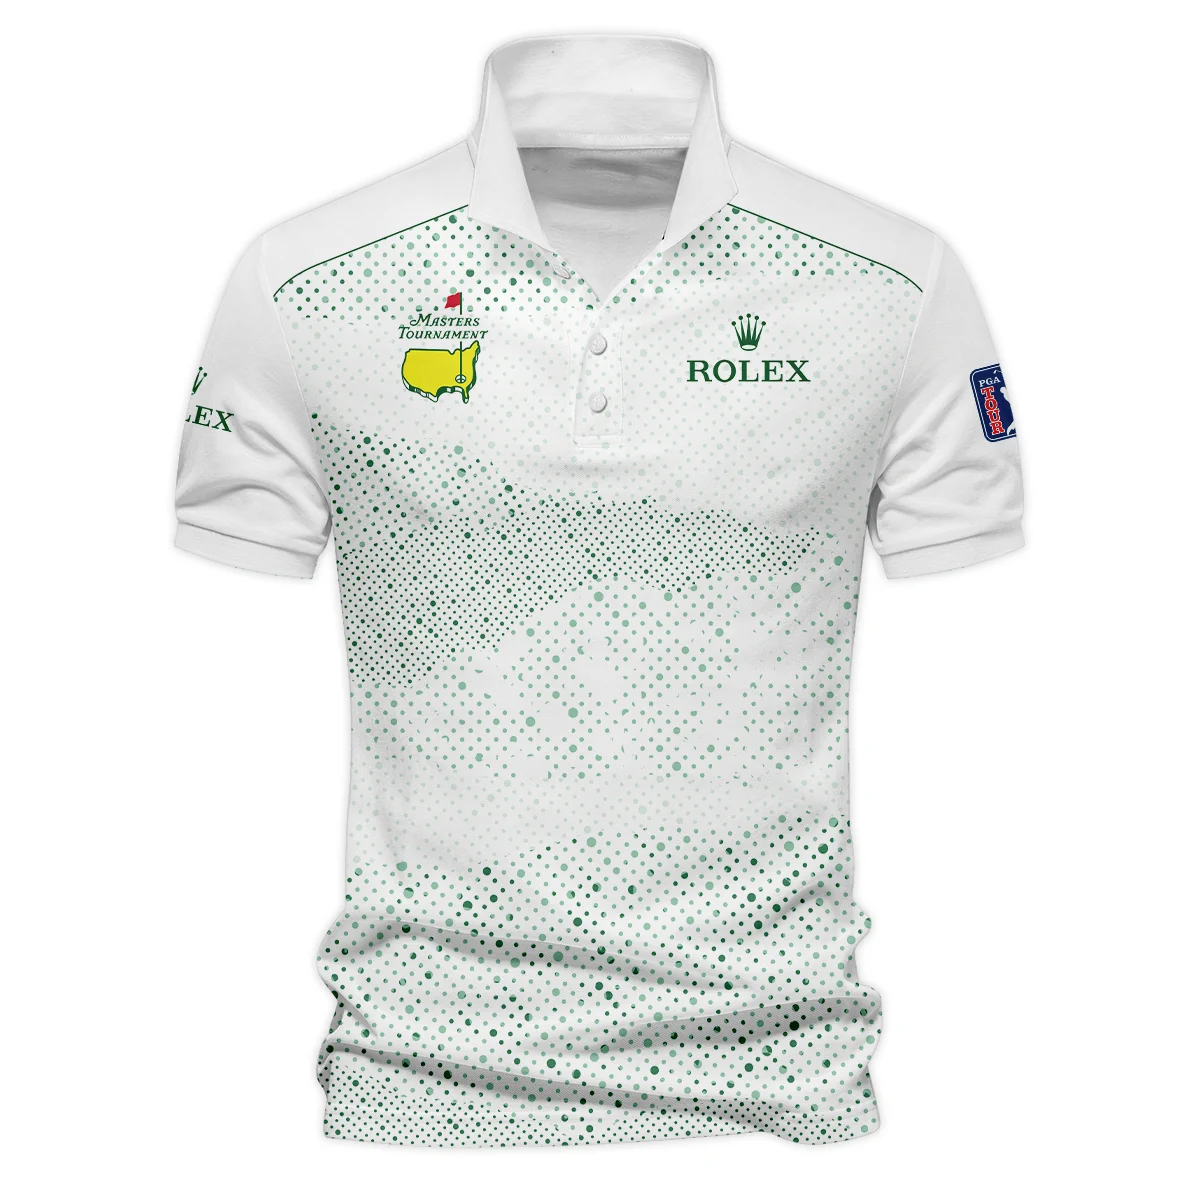 Golf Stye Classic White Mix Green Masters Tournament Rolex Vneck Polo Shirt Style Classic Polo Shirt For Men